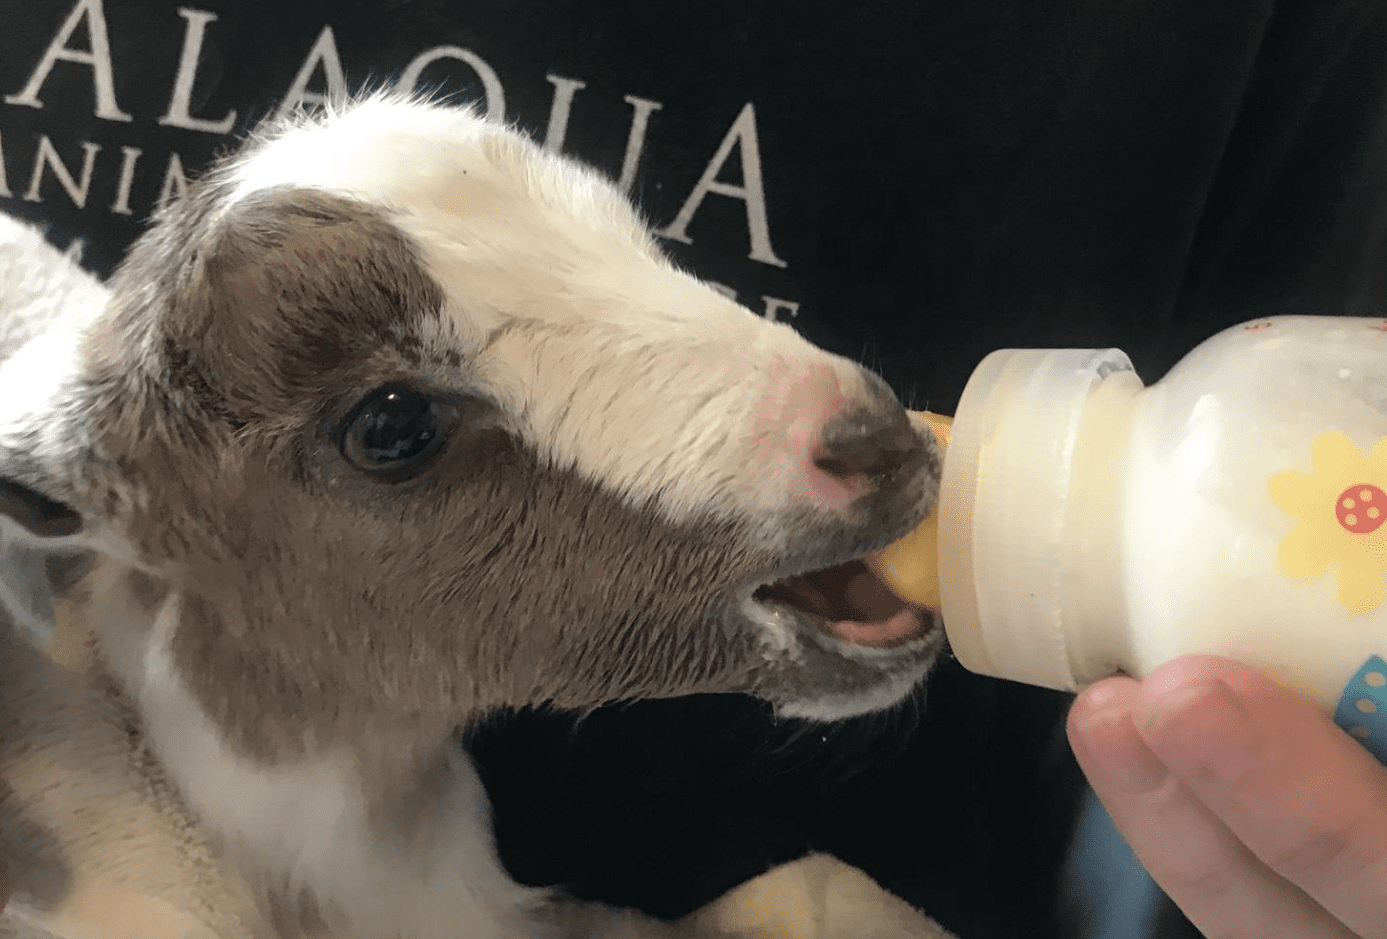 Baby Boom: Rescued Callaway Goats Quickly Multiplying at Alaqua